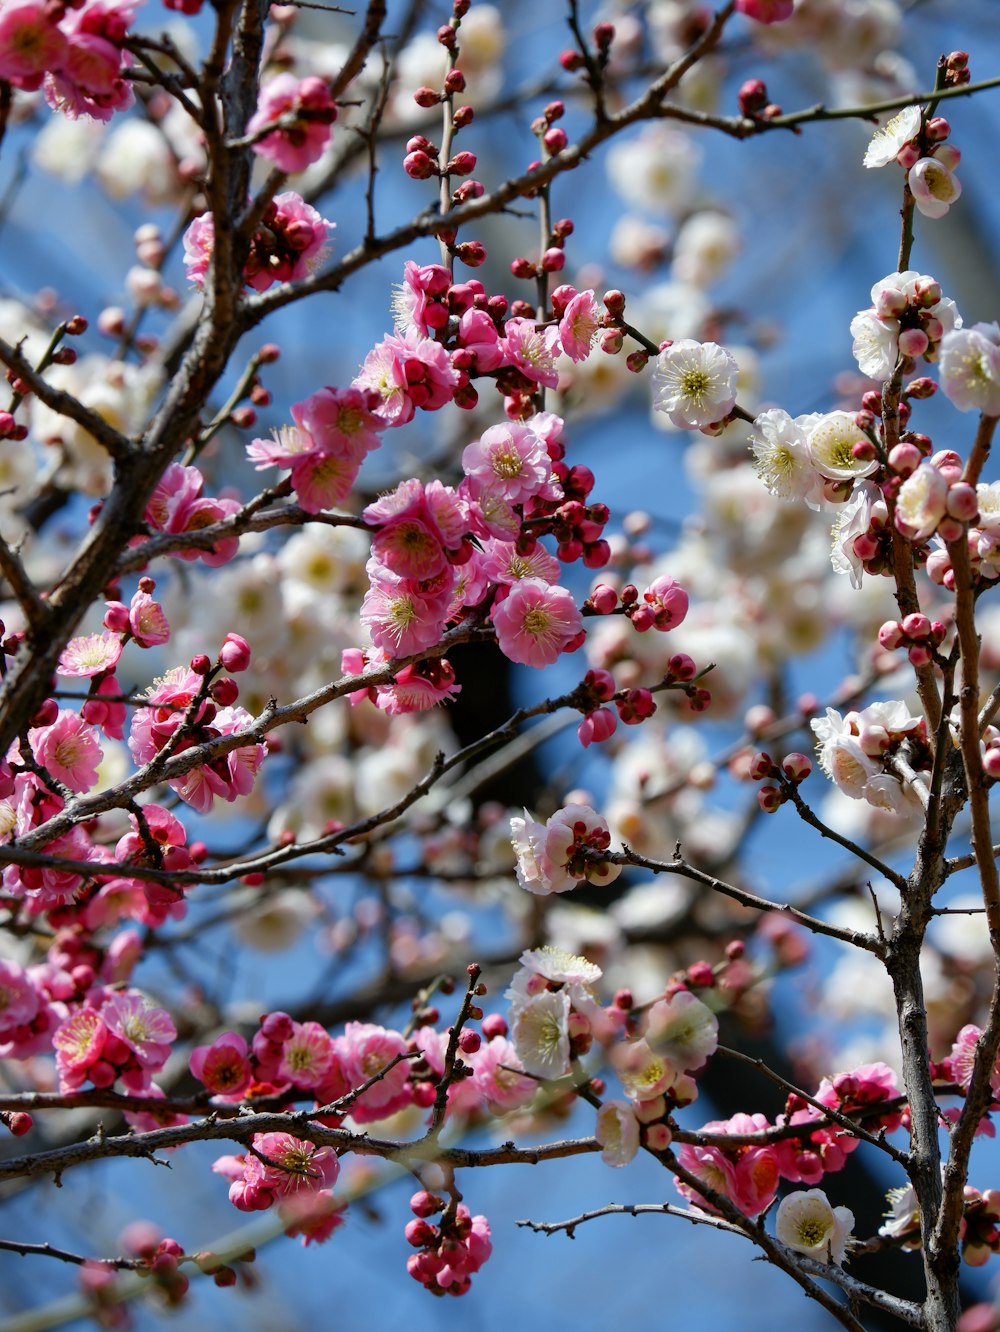 a tree with pink and white flowers on it